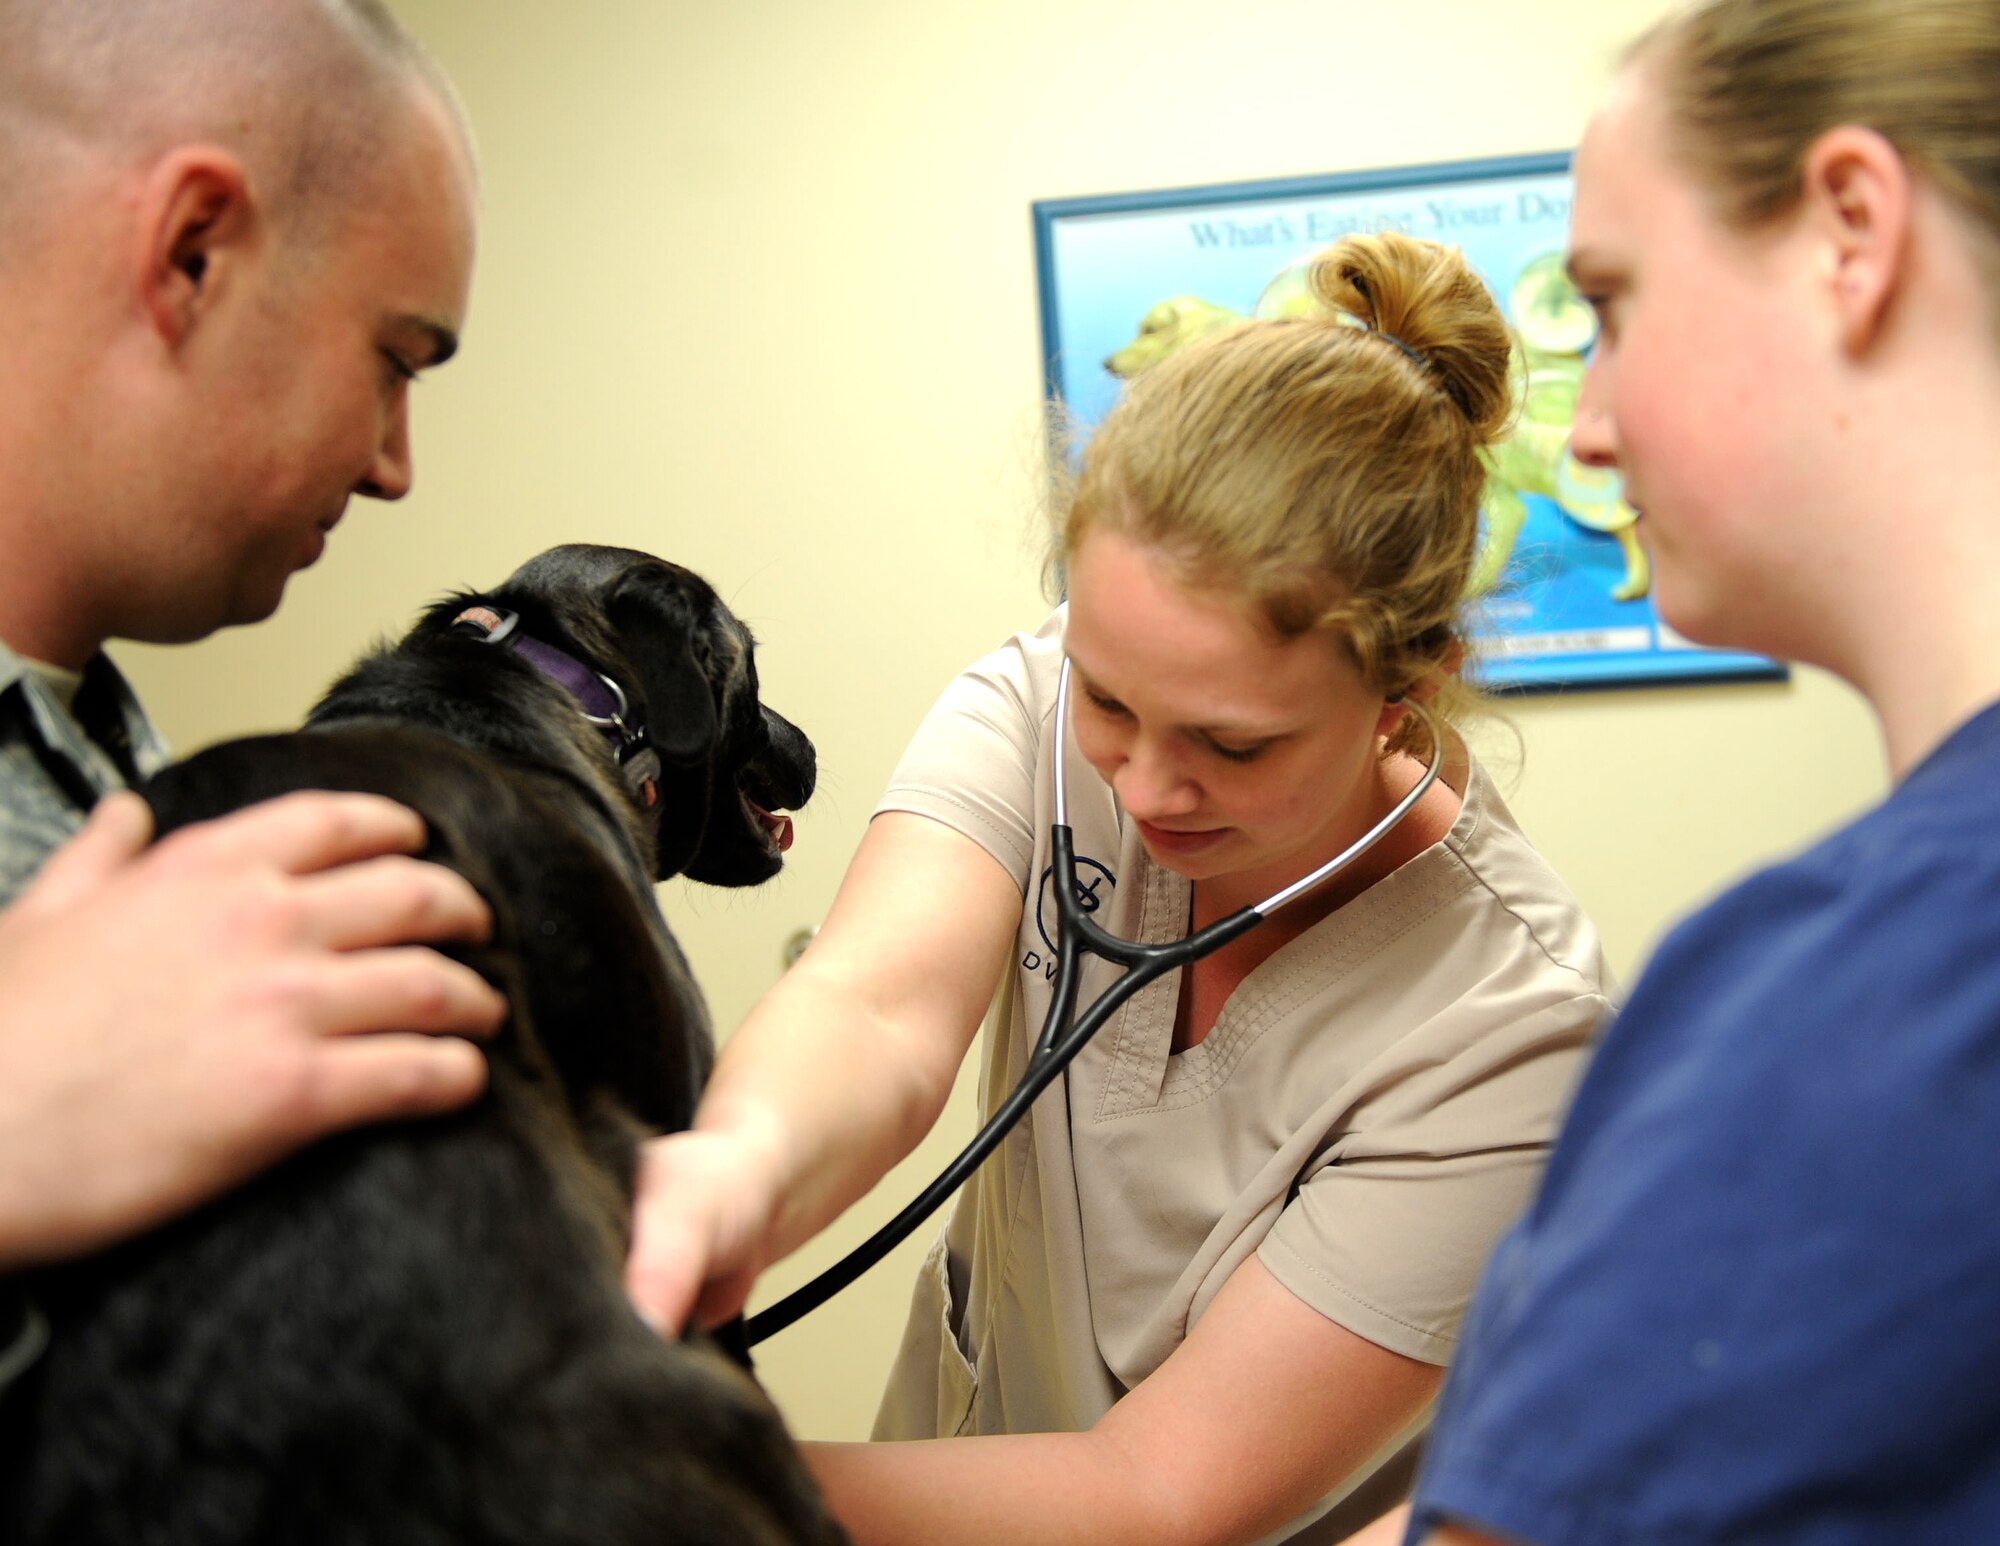 U.S. Army Capt. Megan Branham, Public Health Command at Fort Gordon veterinarian, listens to Dakota’s heartbeat during her first annual checkup at the Veterinary Treatment Facility at Moody Air Force Base, Ga., March 12, 2013. During her visit, she was given a heartworm test, fecal test and vaccines. (U.S. Air Force photo by Airman 1st Class Olivia Bumpers/Released)